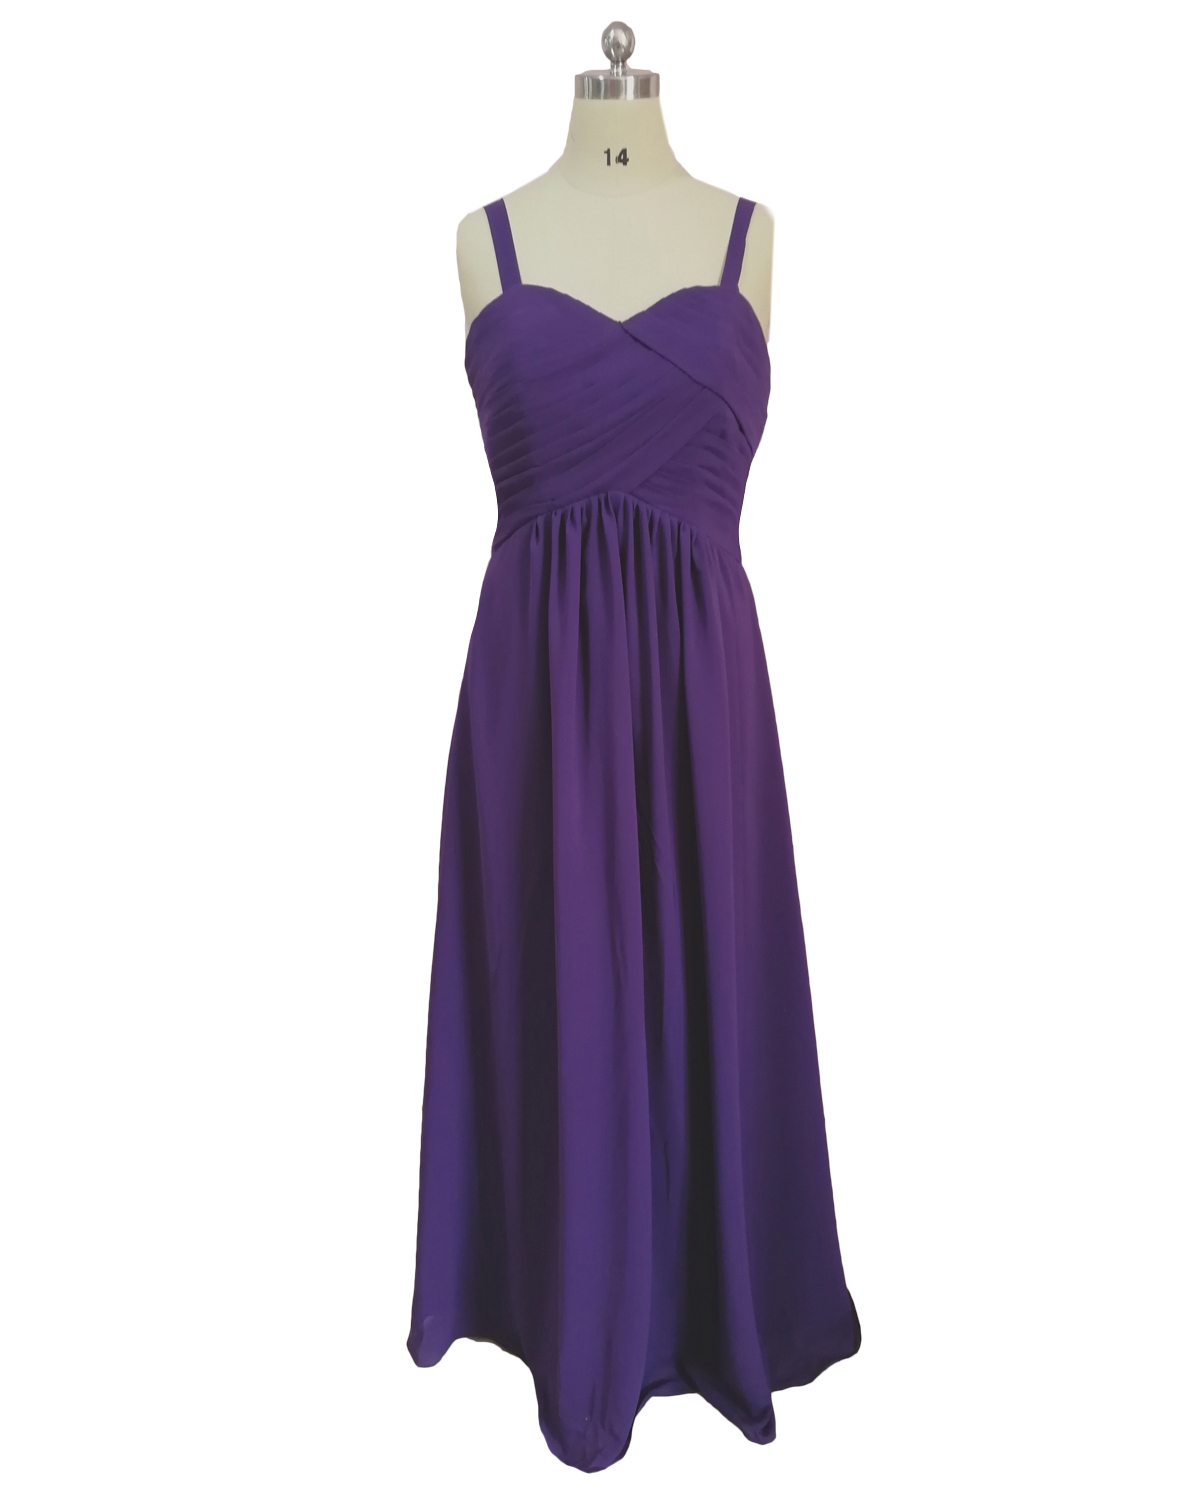 Long A-line Purple Prom Dresses , Spaghetti Straps Chiffon Evening Gowns - Formal Gowns, Party Dresses